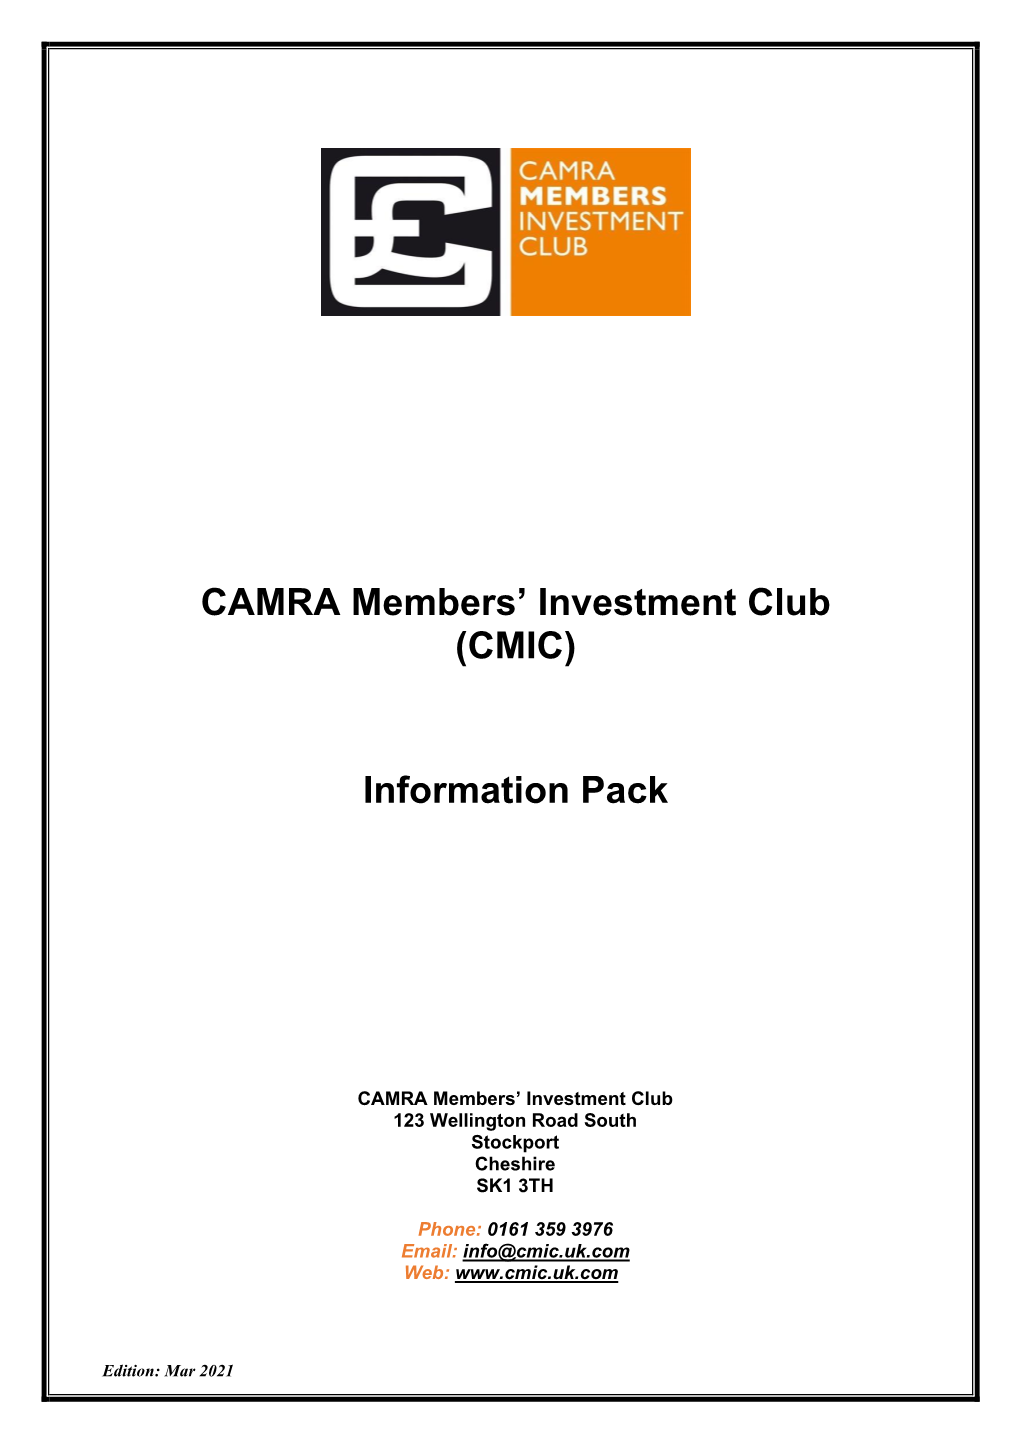 CAMRA Members' Investment Club (CMIC) Information Pack